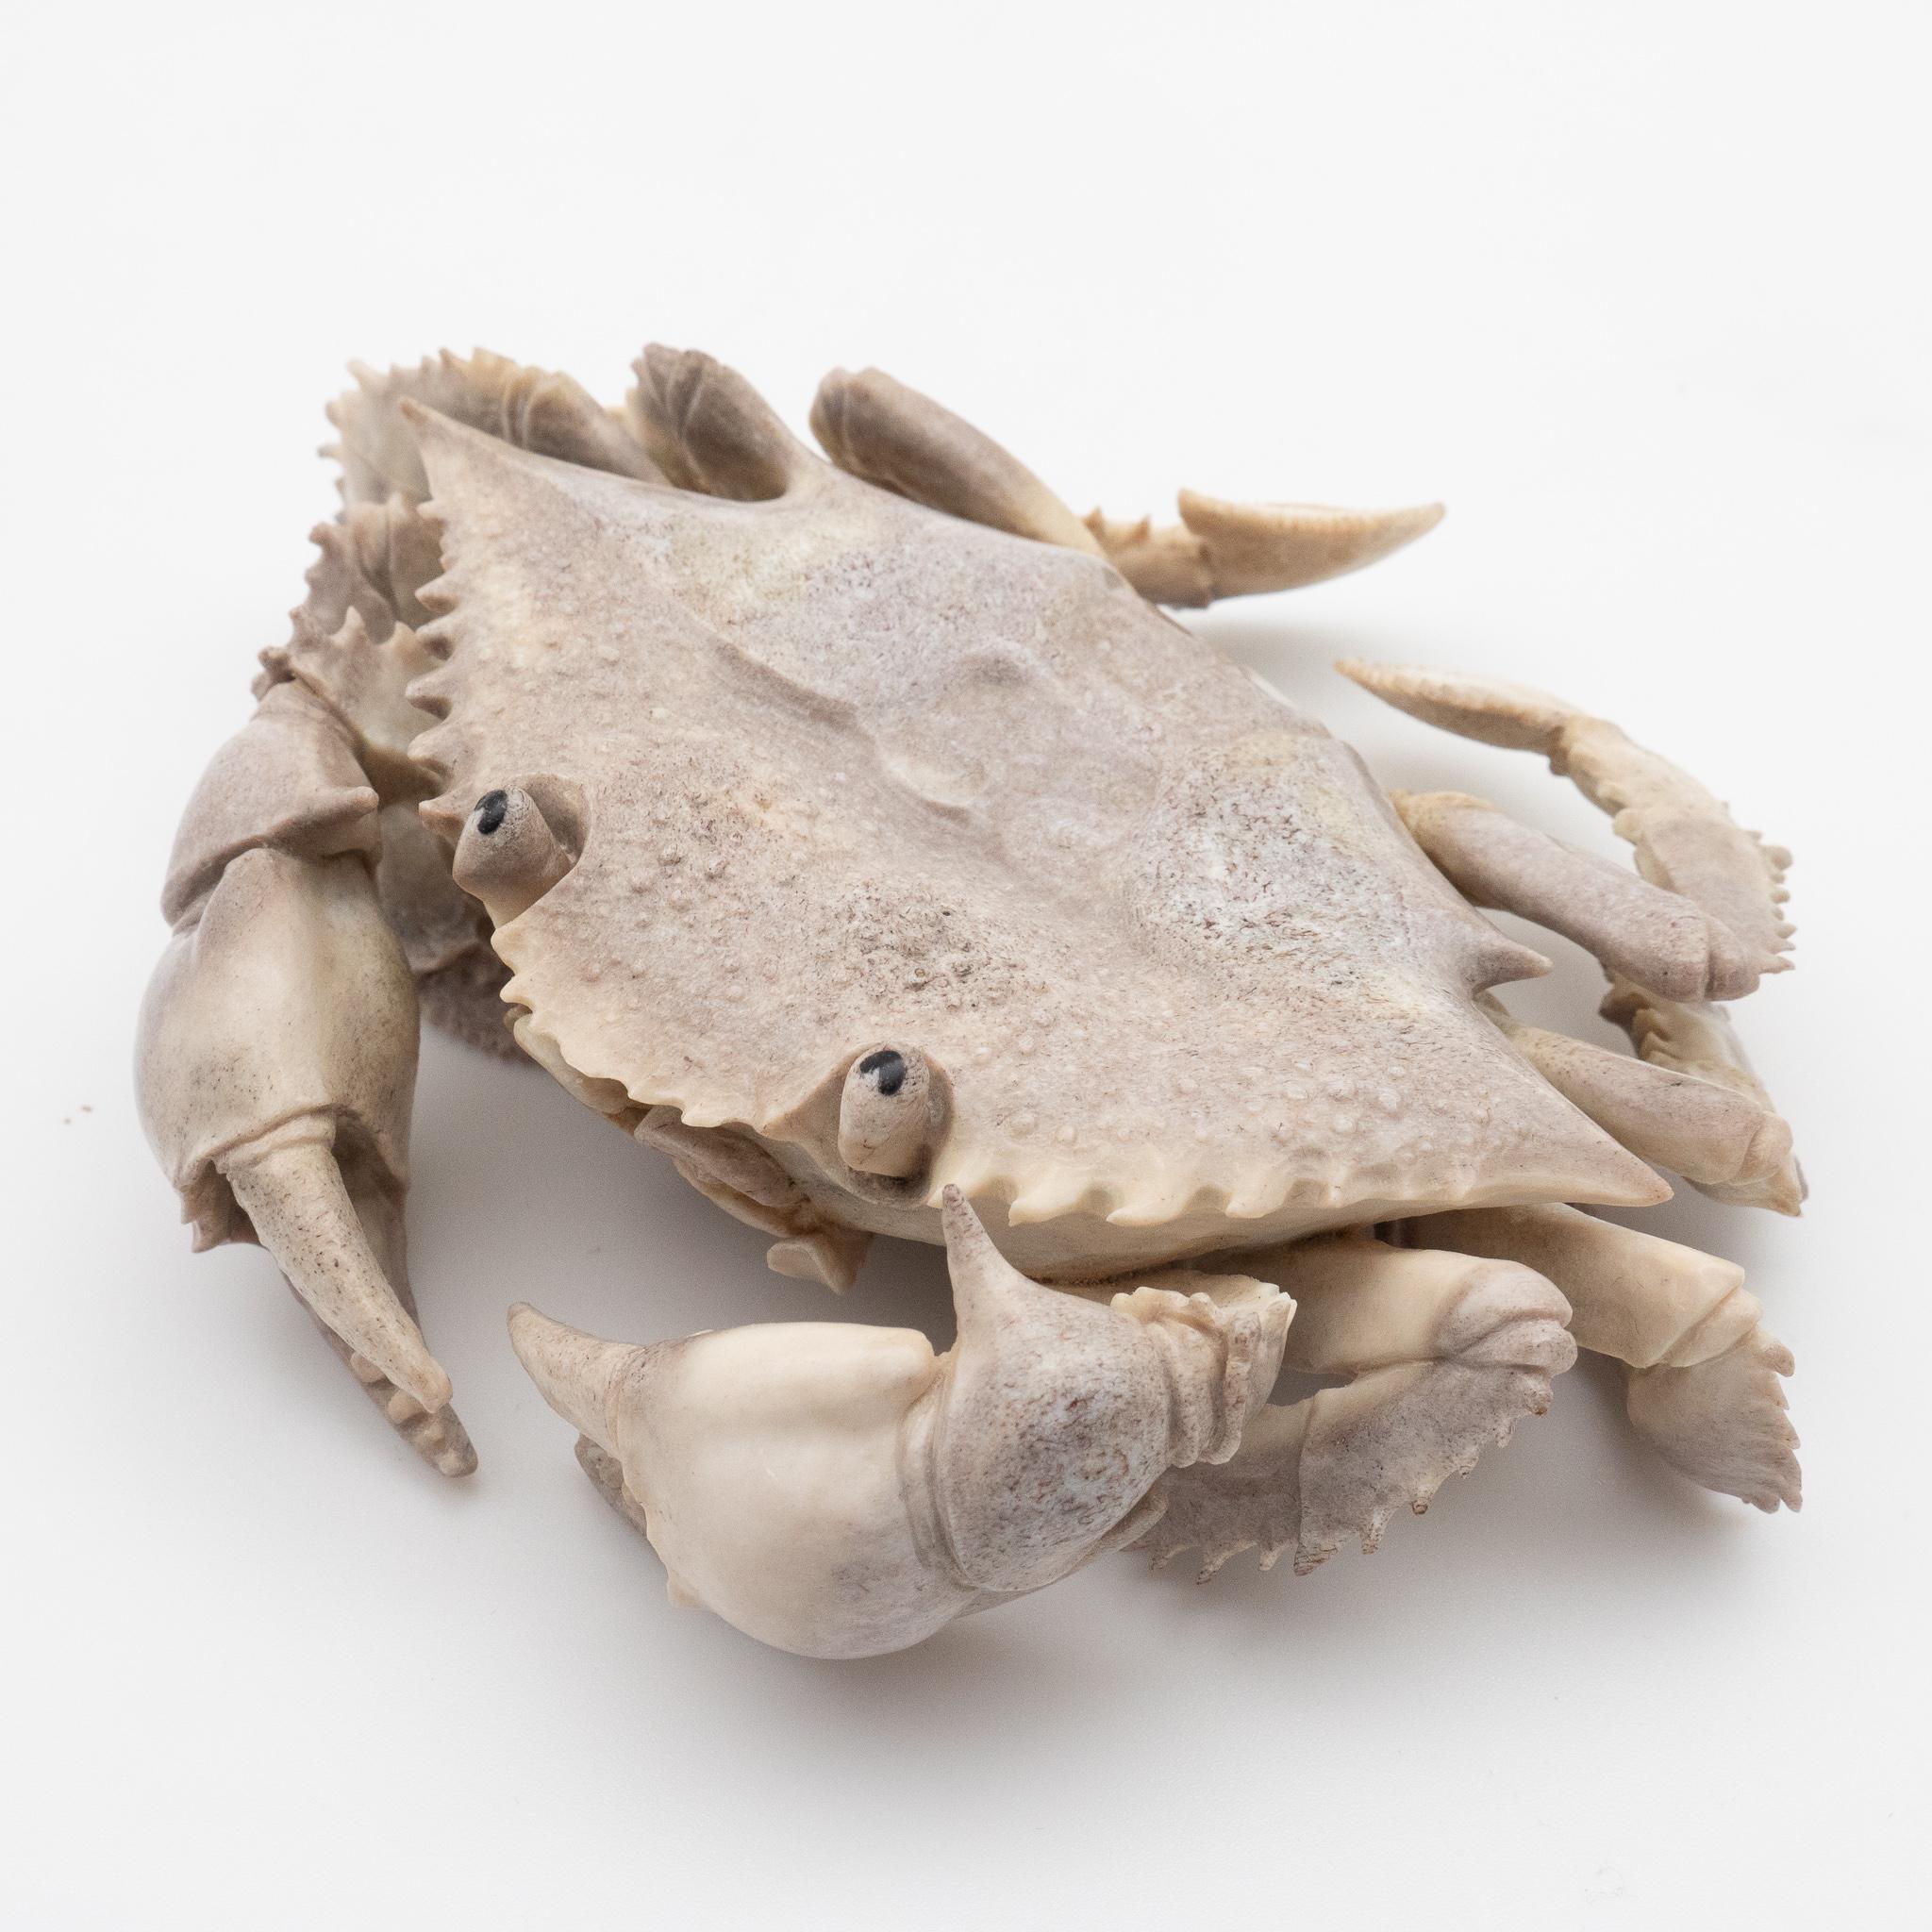 Land and detailed moose antler carving of a crab, from Indonesia. This is a one of a kind object. The moose antler was sourced in North America and then sent to Asia for carving. Quality of ivory, but with sustainability, as the moose naturally shed